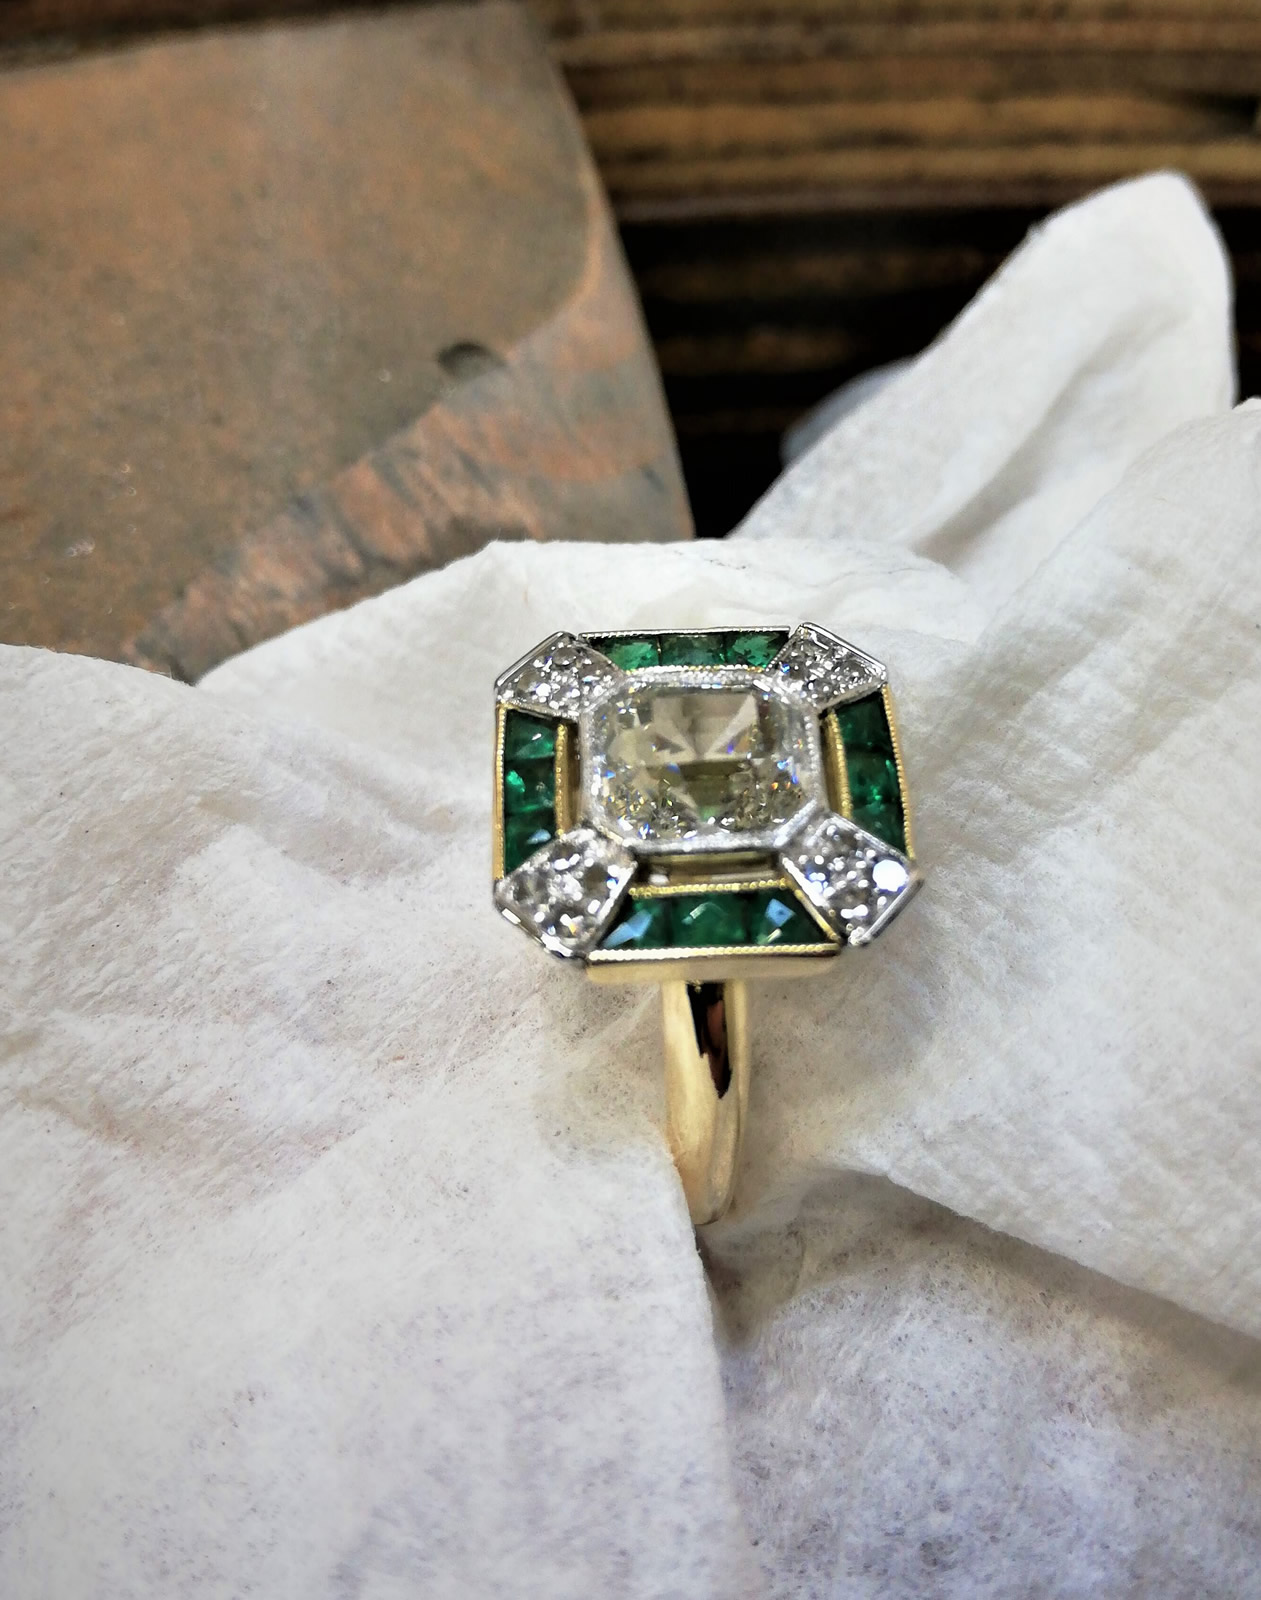 Jewellery Repairs | Goldsmith in Plymouth